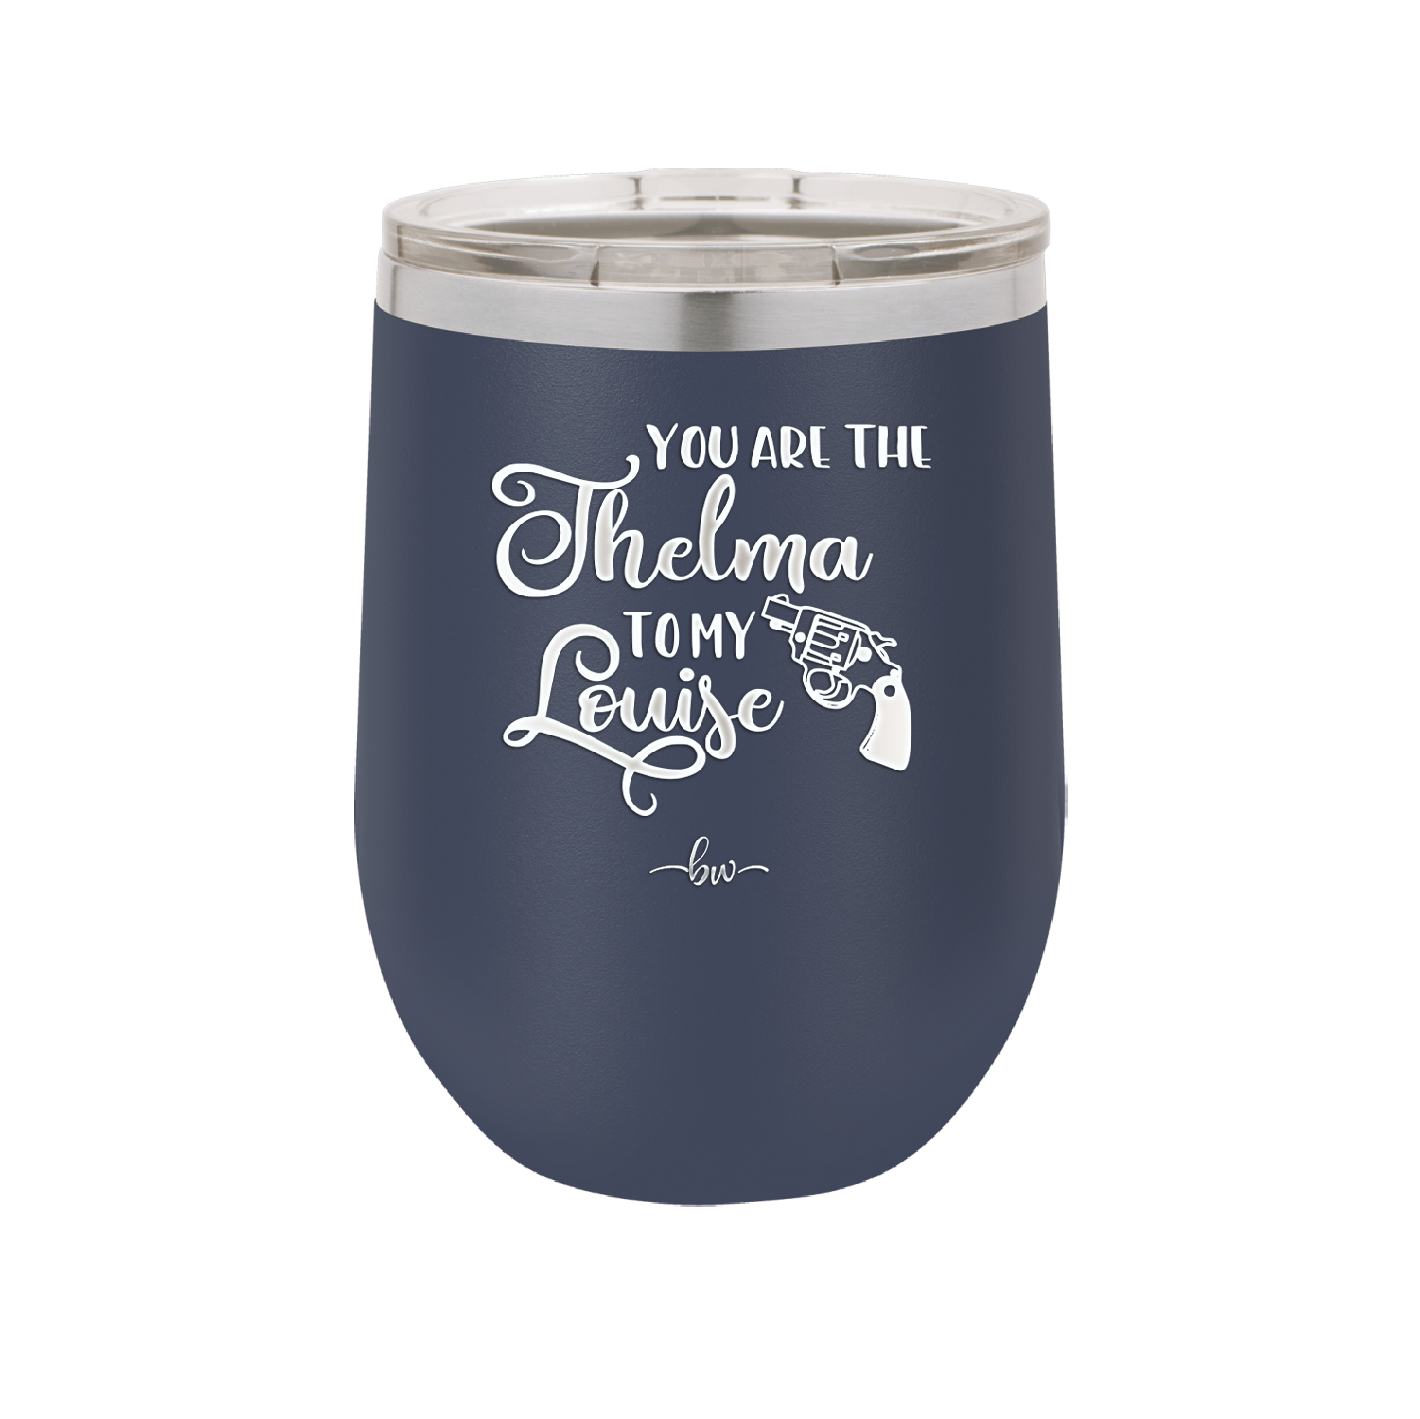 You are the Thelma to My Louise - Laser Engraved Stainless Steel Drinkware - 1113 -